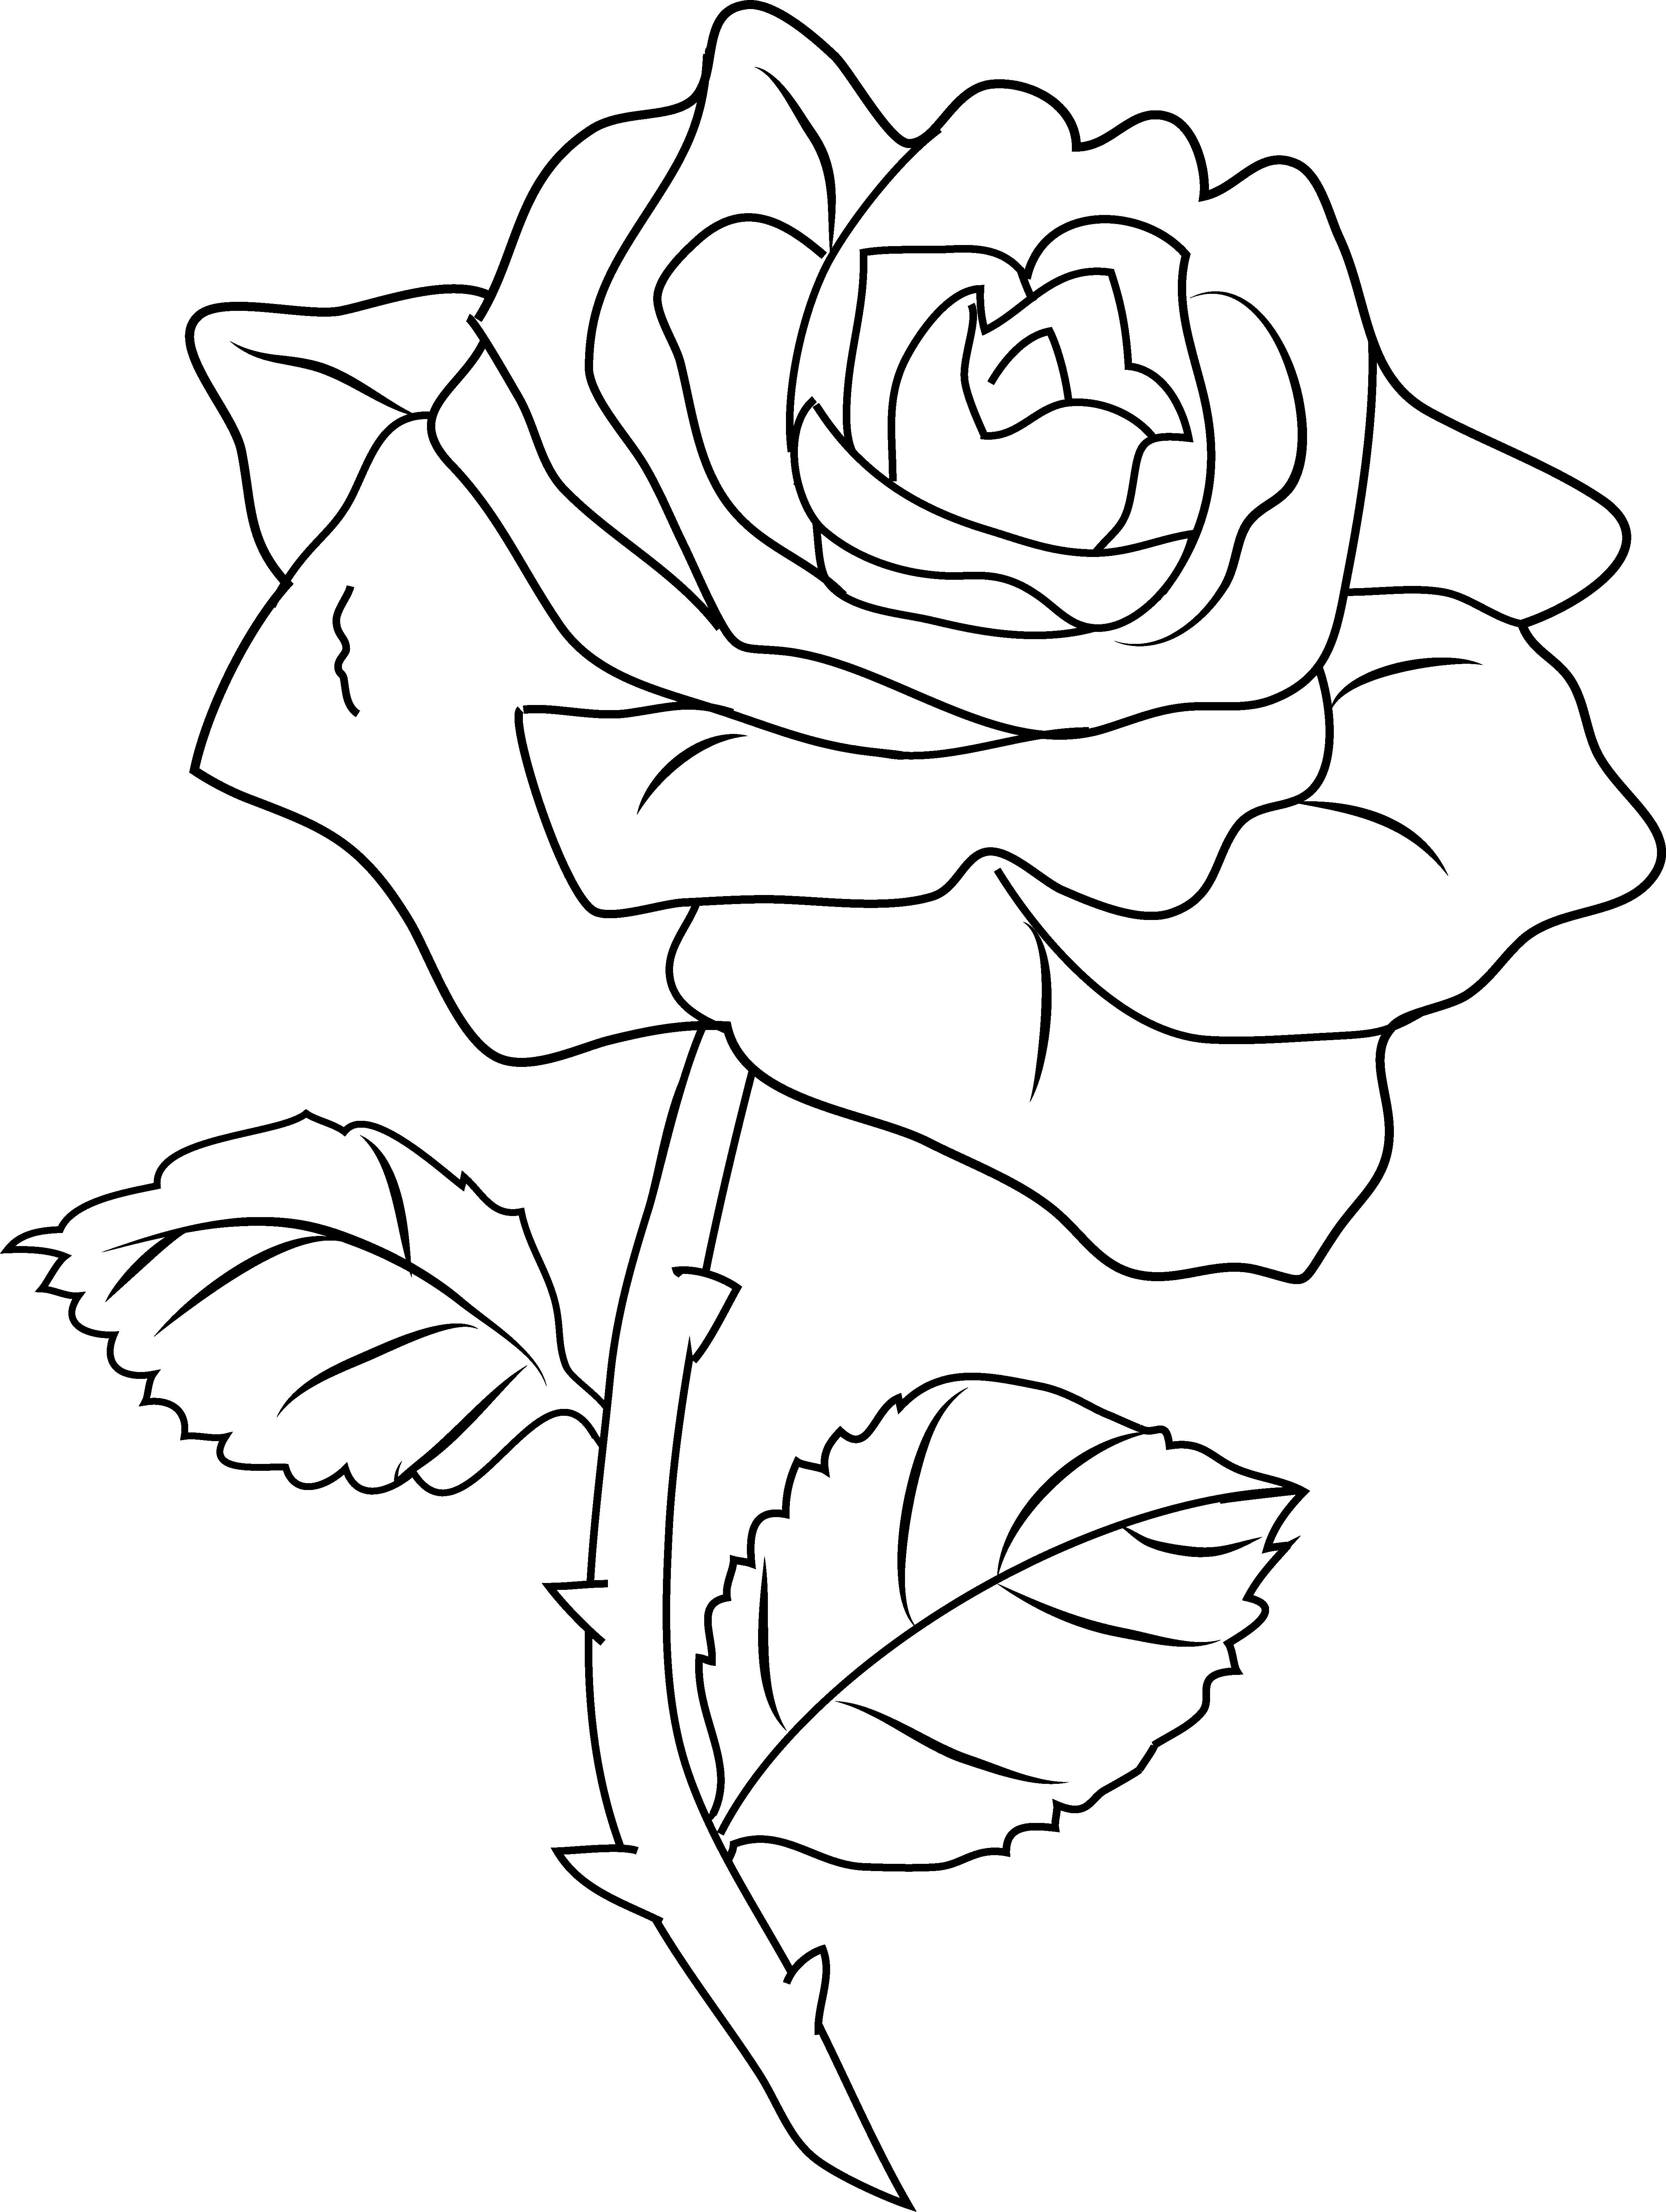 Black And White Pictures Of Roses - Cliparts.co